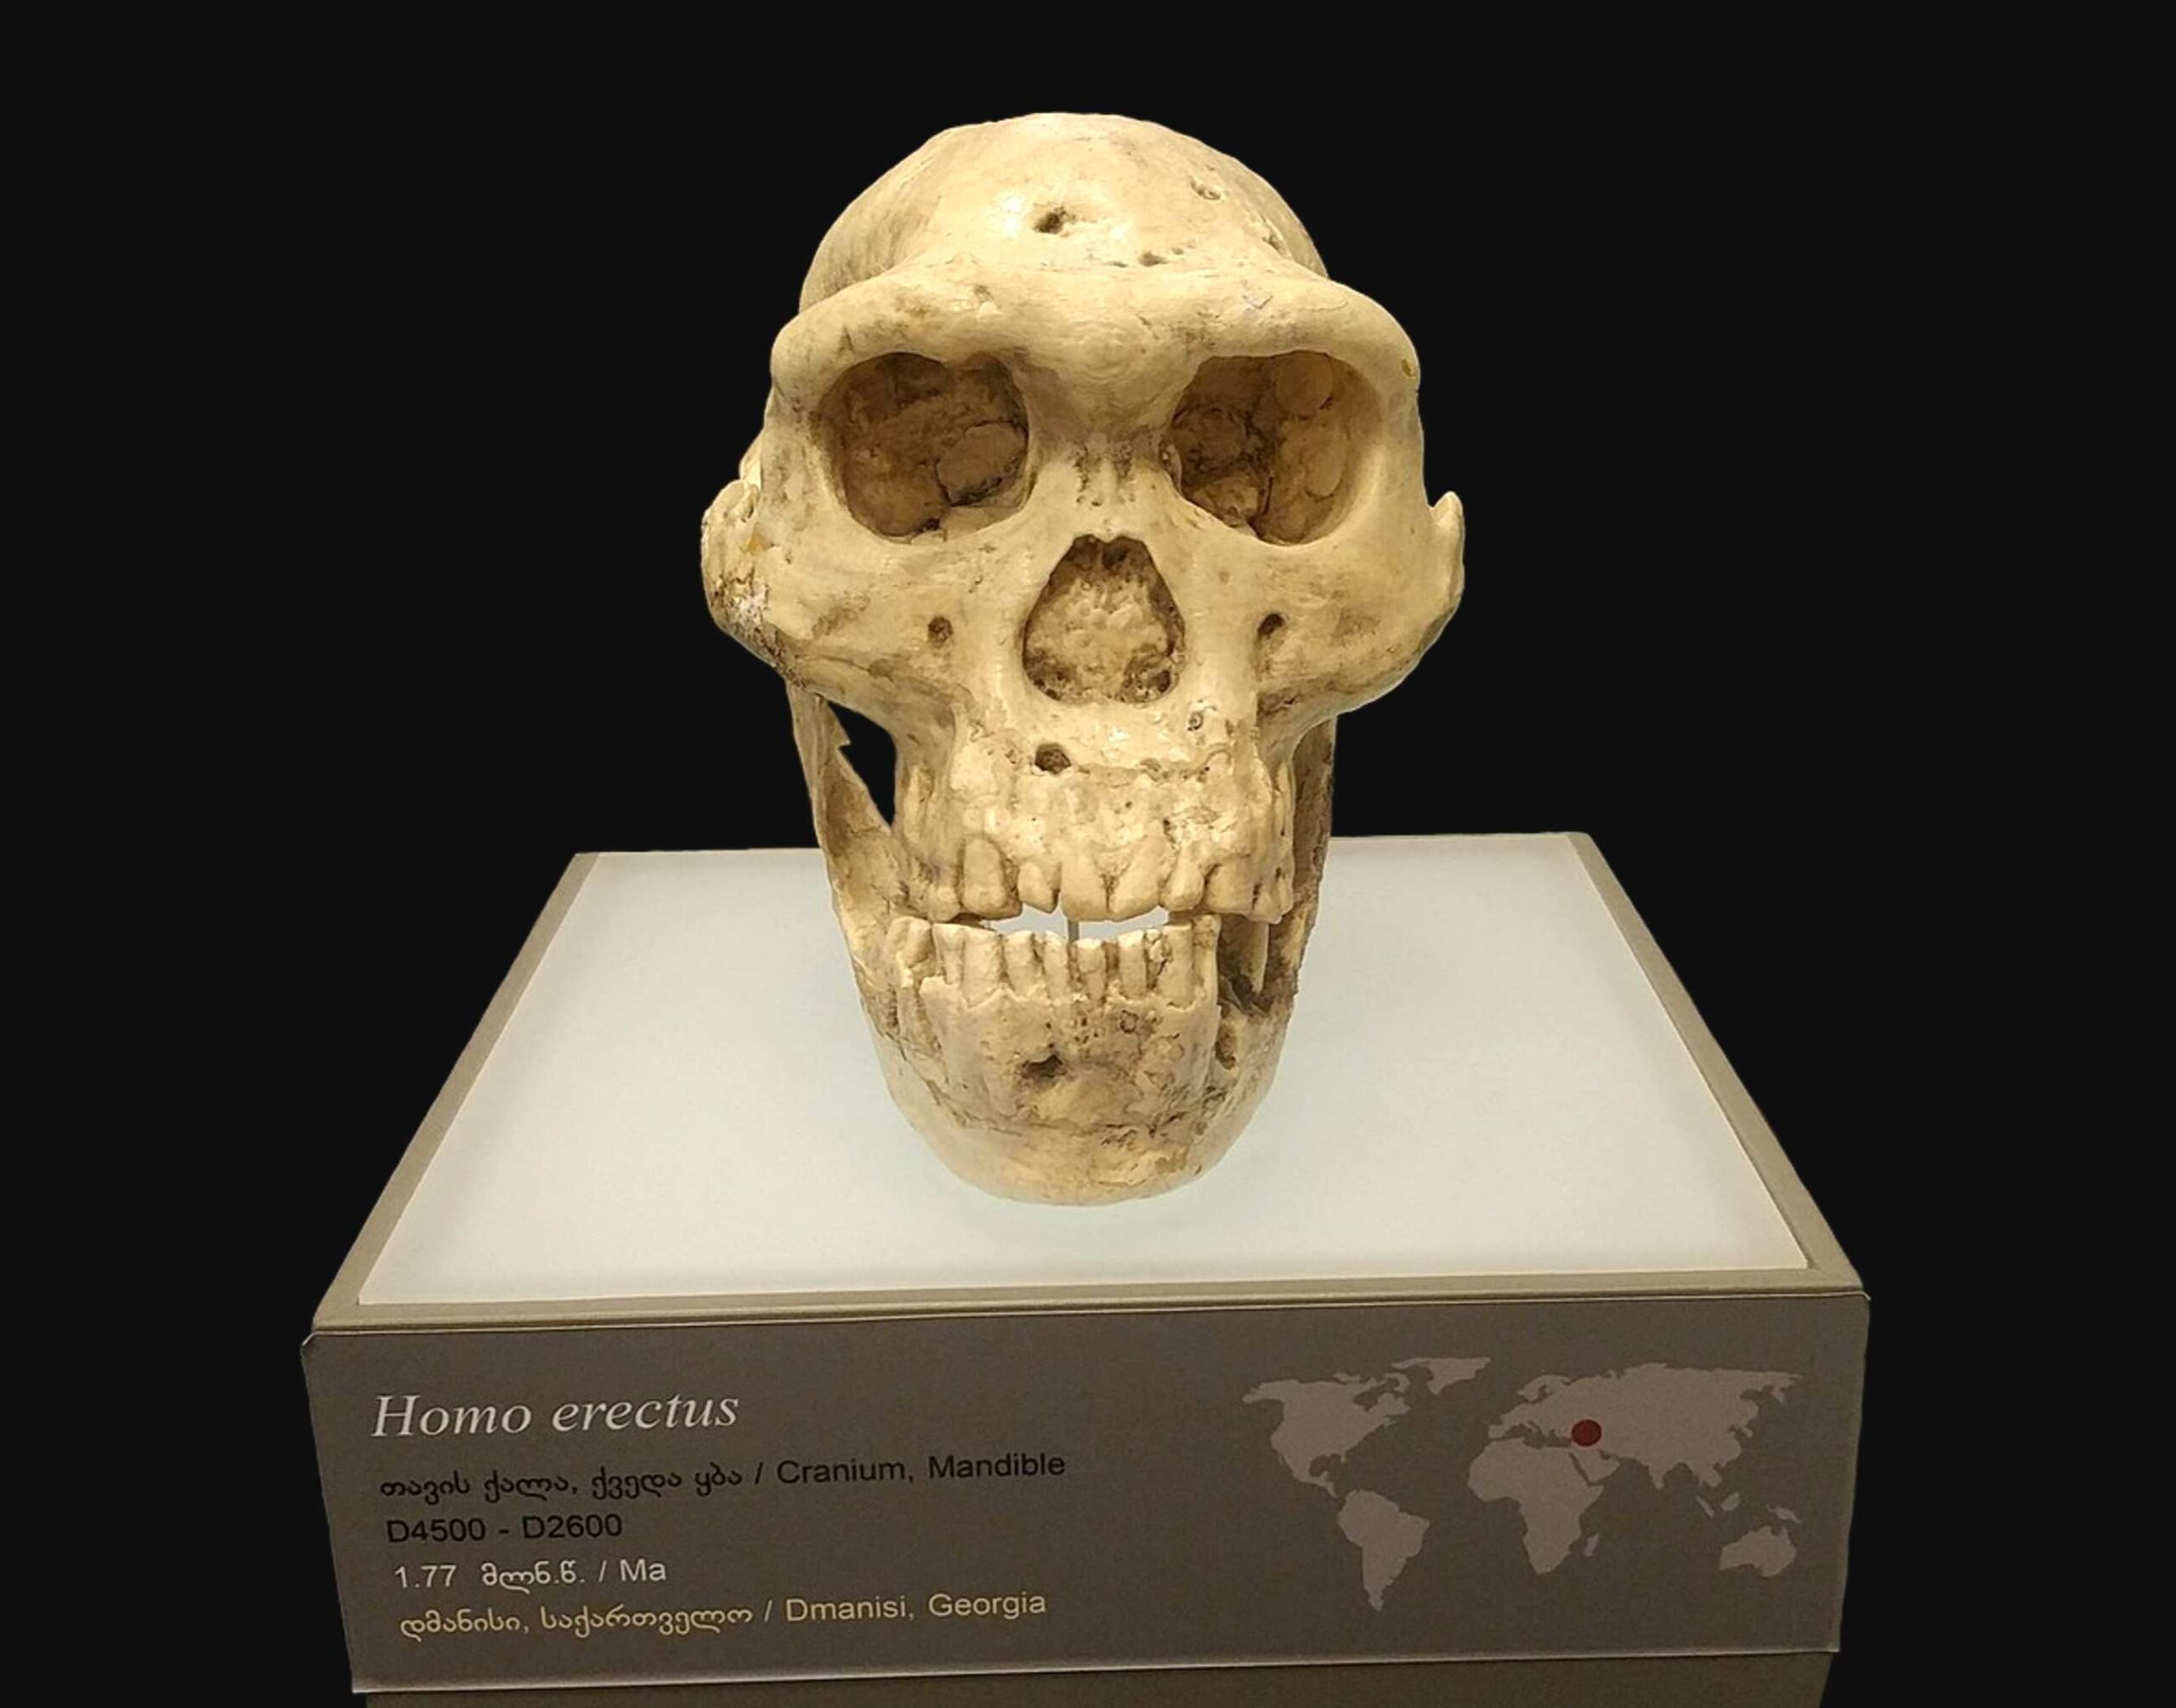 Skull 5 ― A million years old human skull forced scientists to rethink early human evolution 6